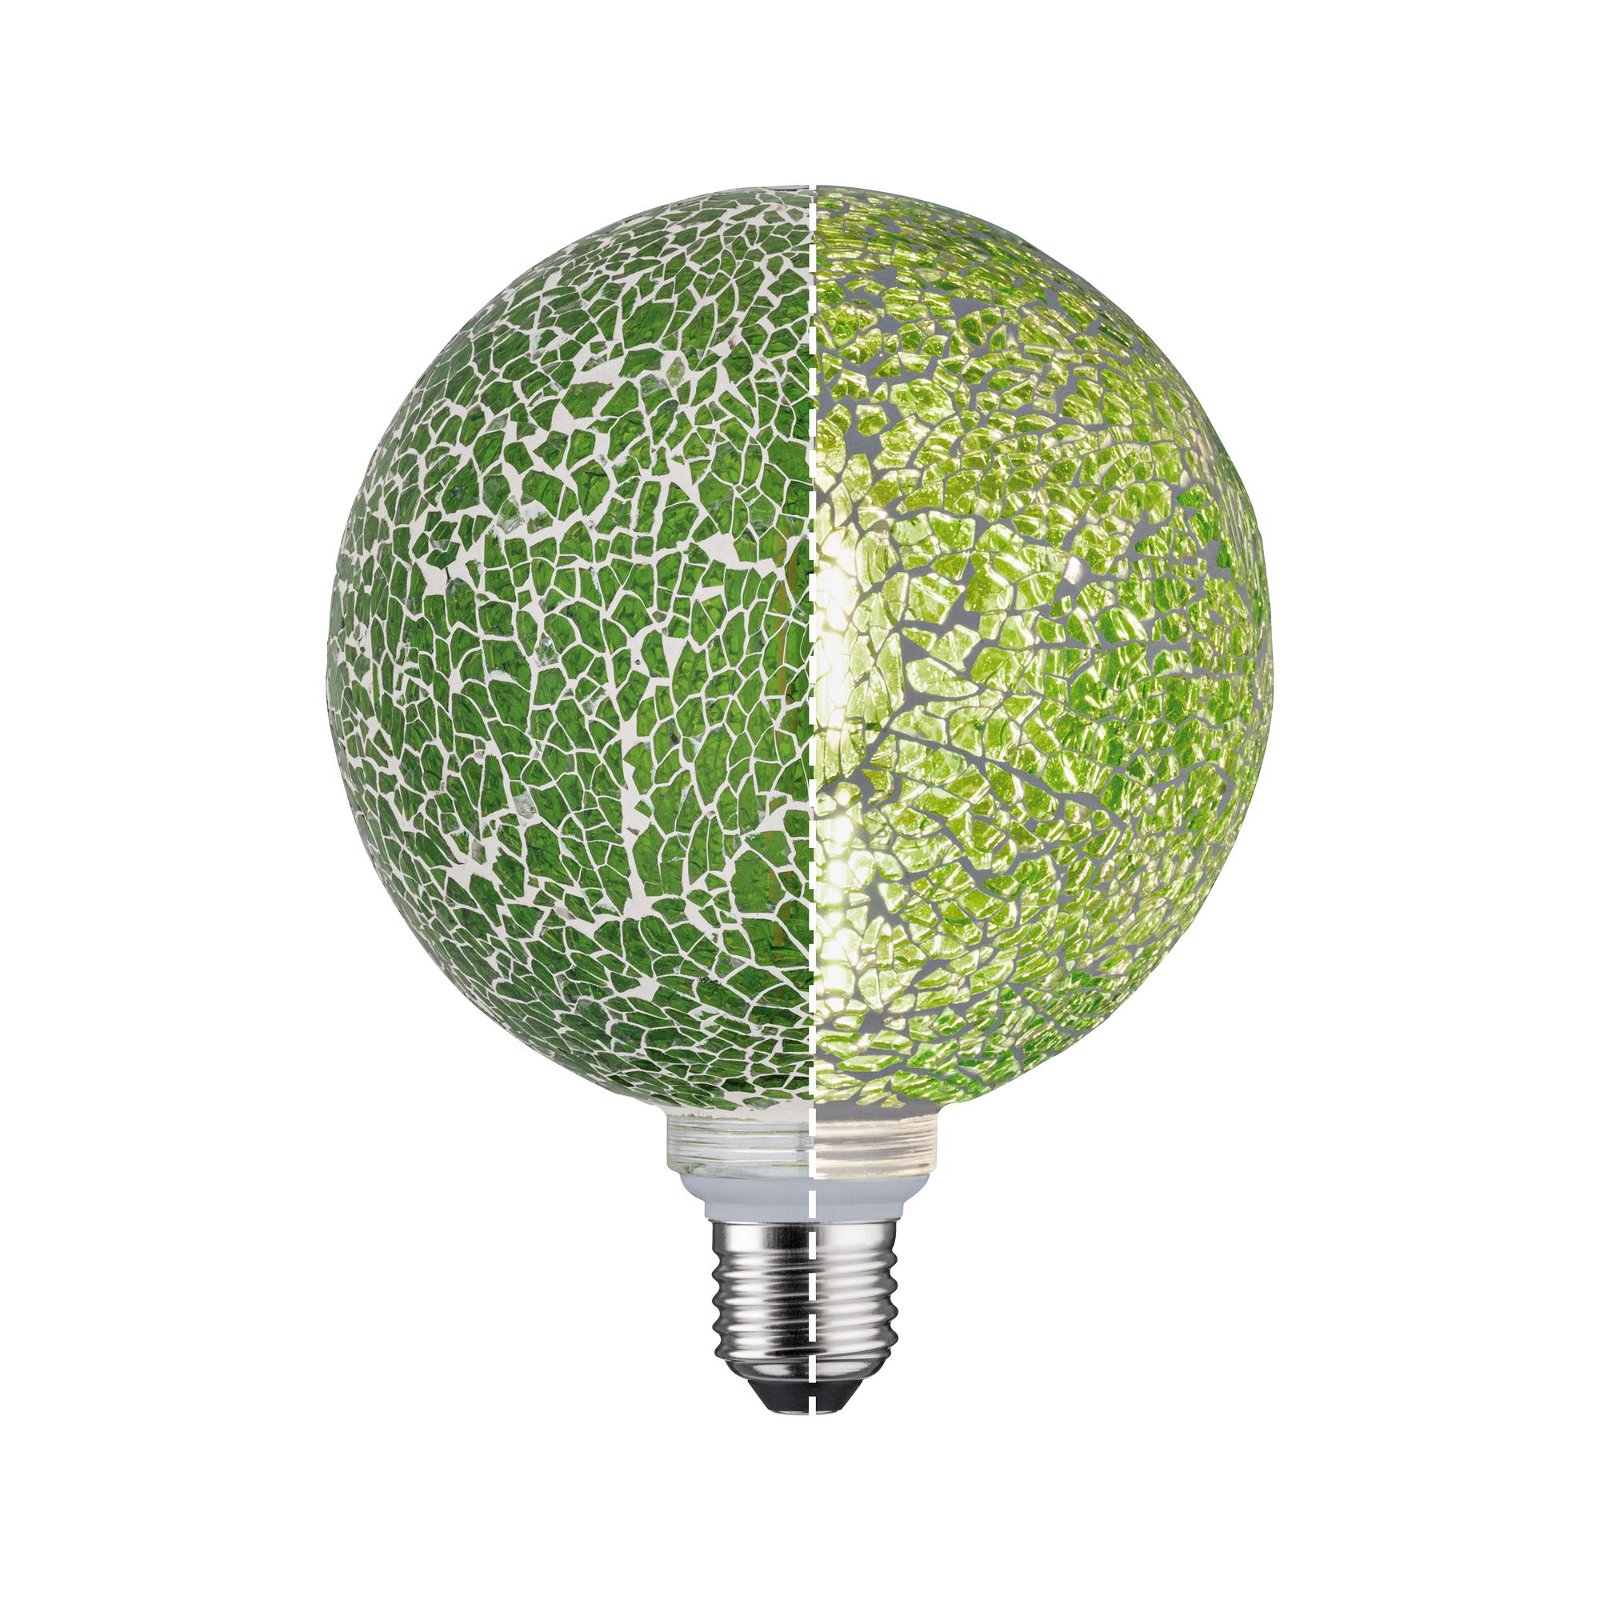 Miracle Mosaic Edition 230 V Standard LED Globe G125 E27 470lm 5W 2700K dimmable Green